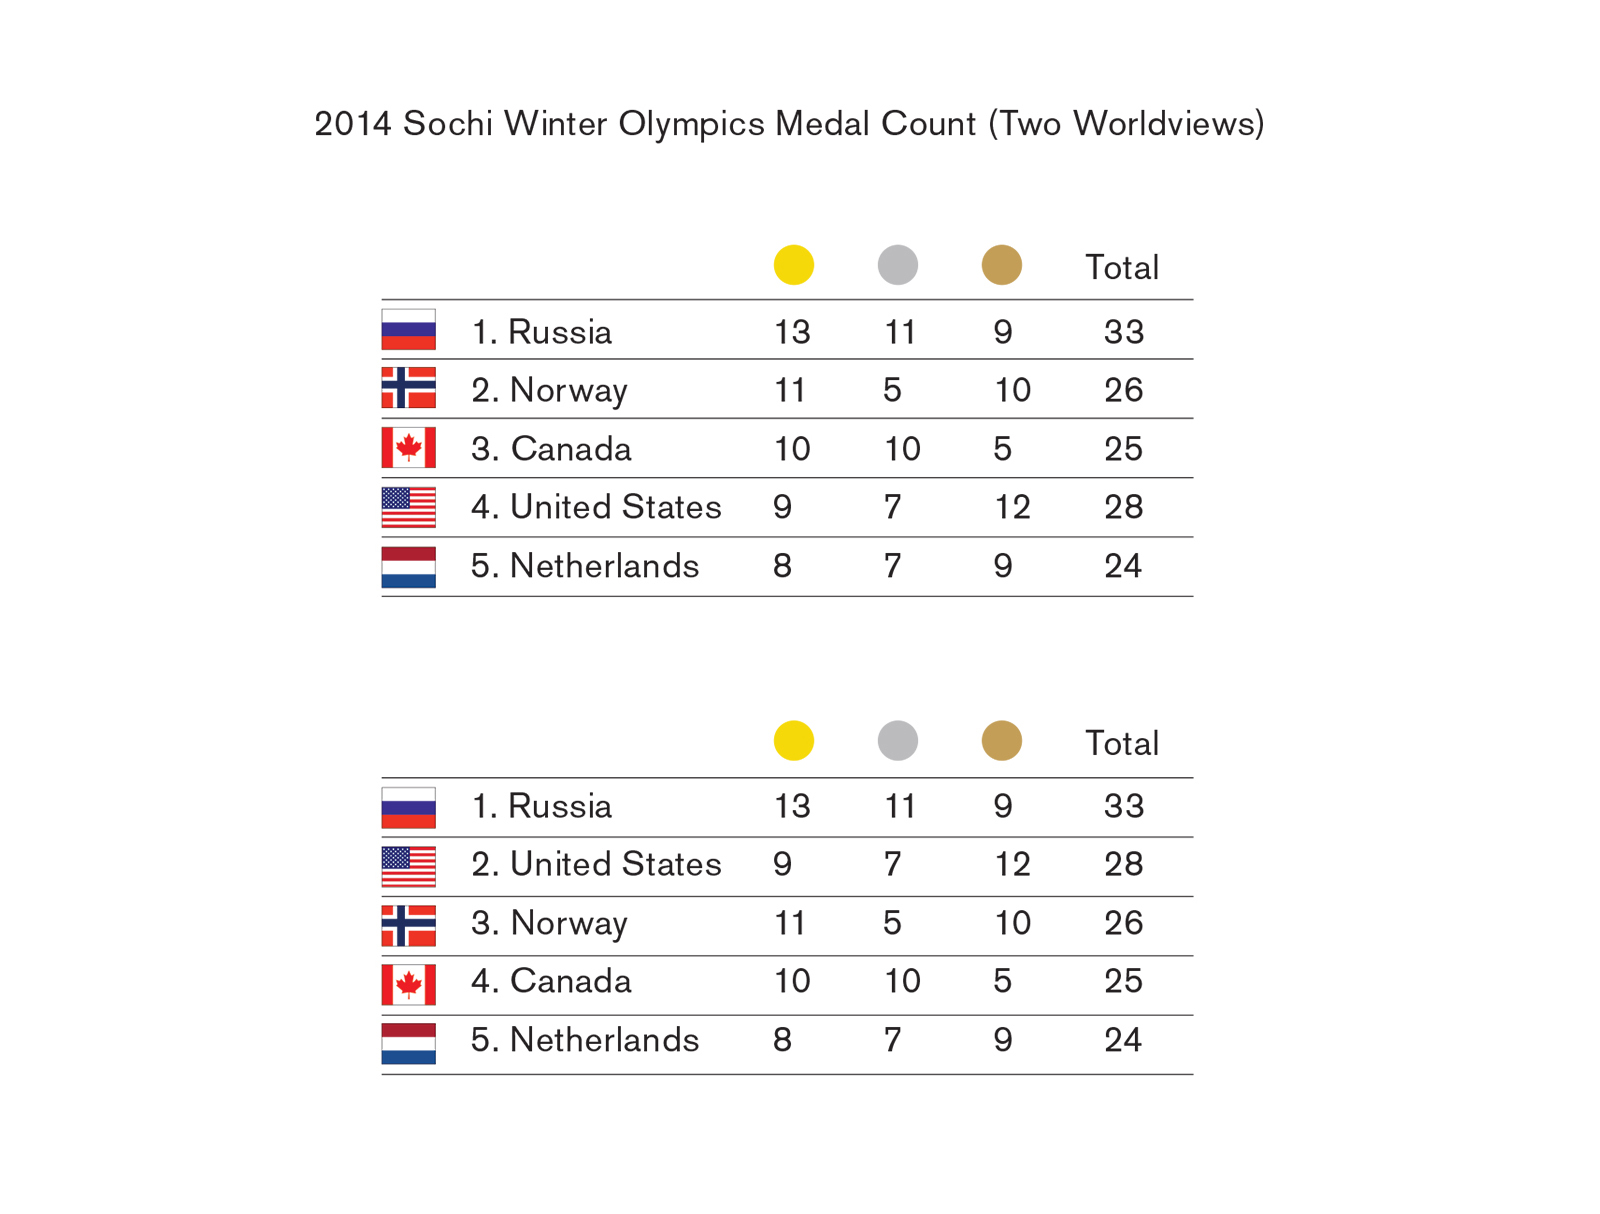 A postcard depicting the informational ranking table of the two thousand and fourteen Sochi Winter Olympic Medal Count, and a table representing the US media’s more favorable ranking system which tallies total number of medals won.